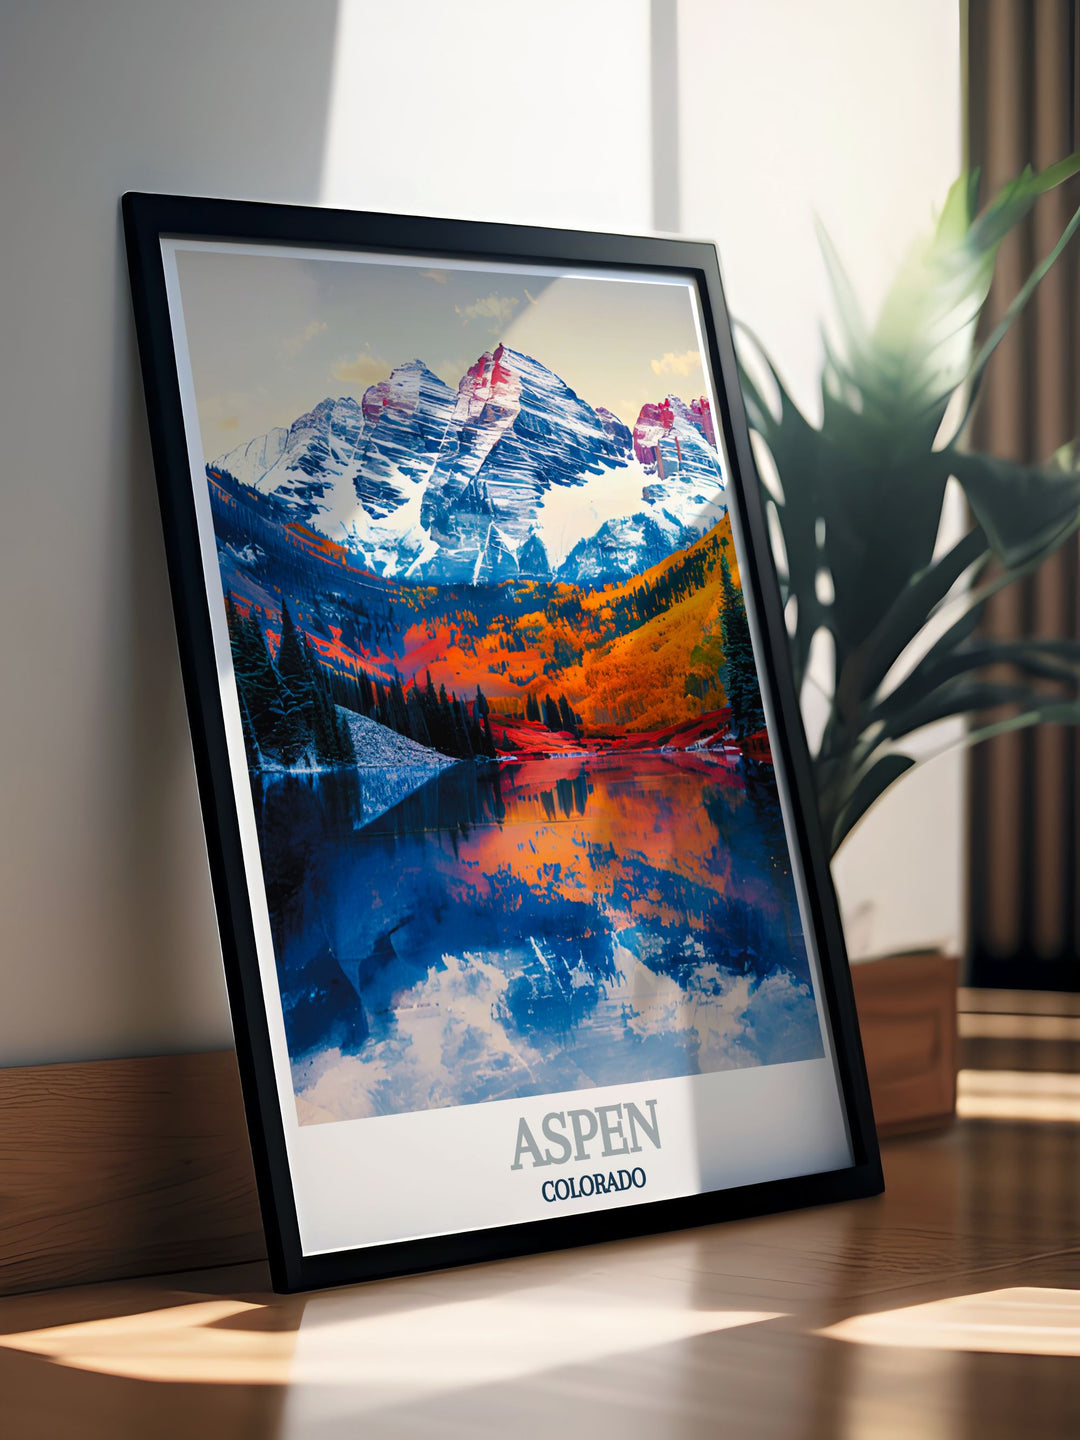 This vibrant travel poster captures Aspens winter charm, highlighting its famous ski slopes and historical town center, ideal for those who love winter sports and picturesque mountain towns.